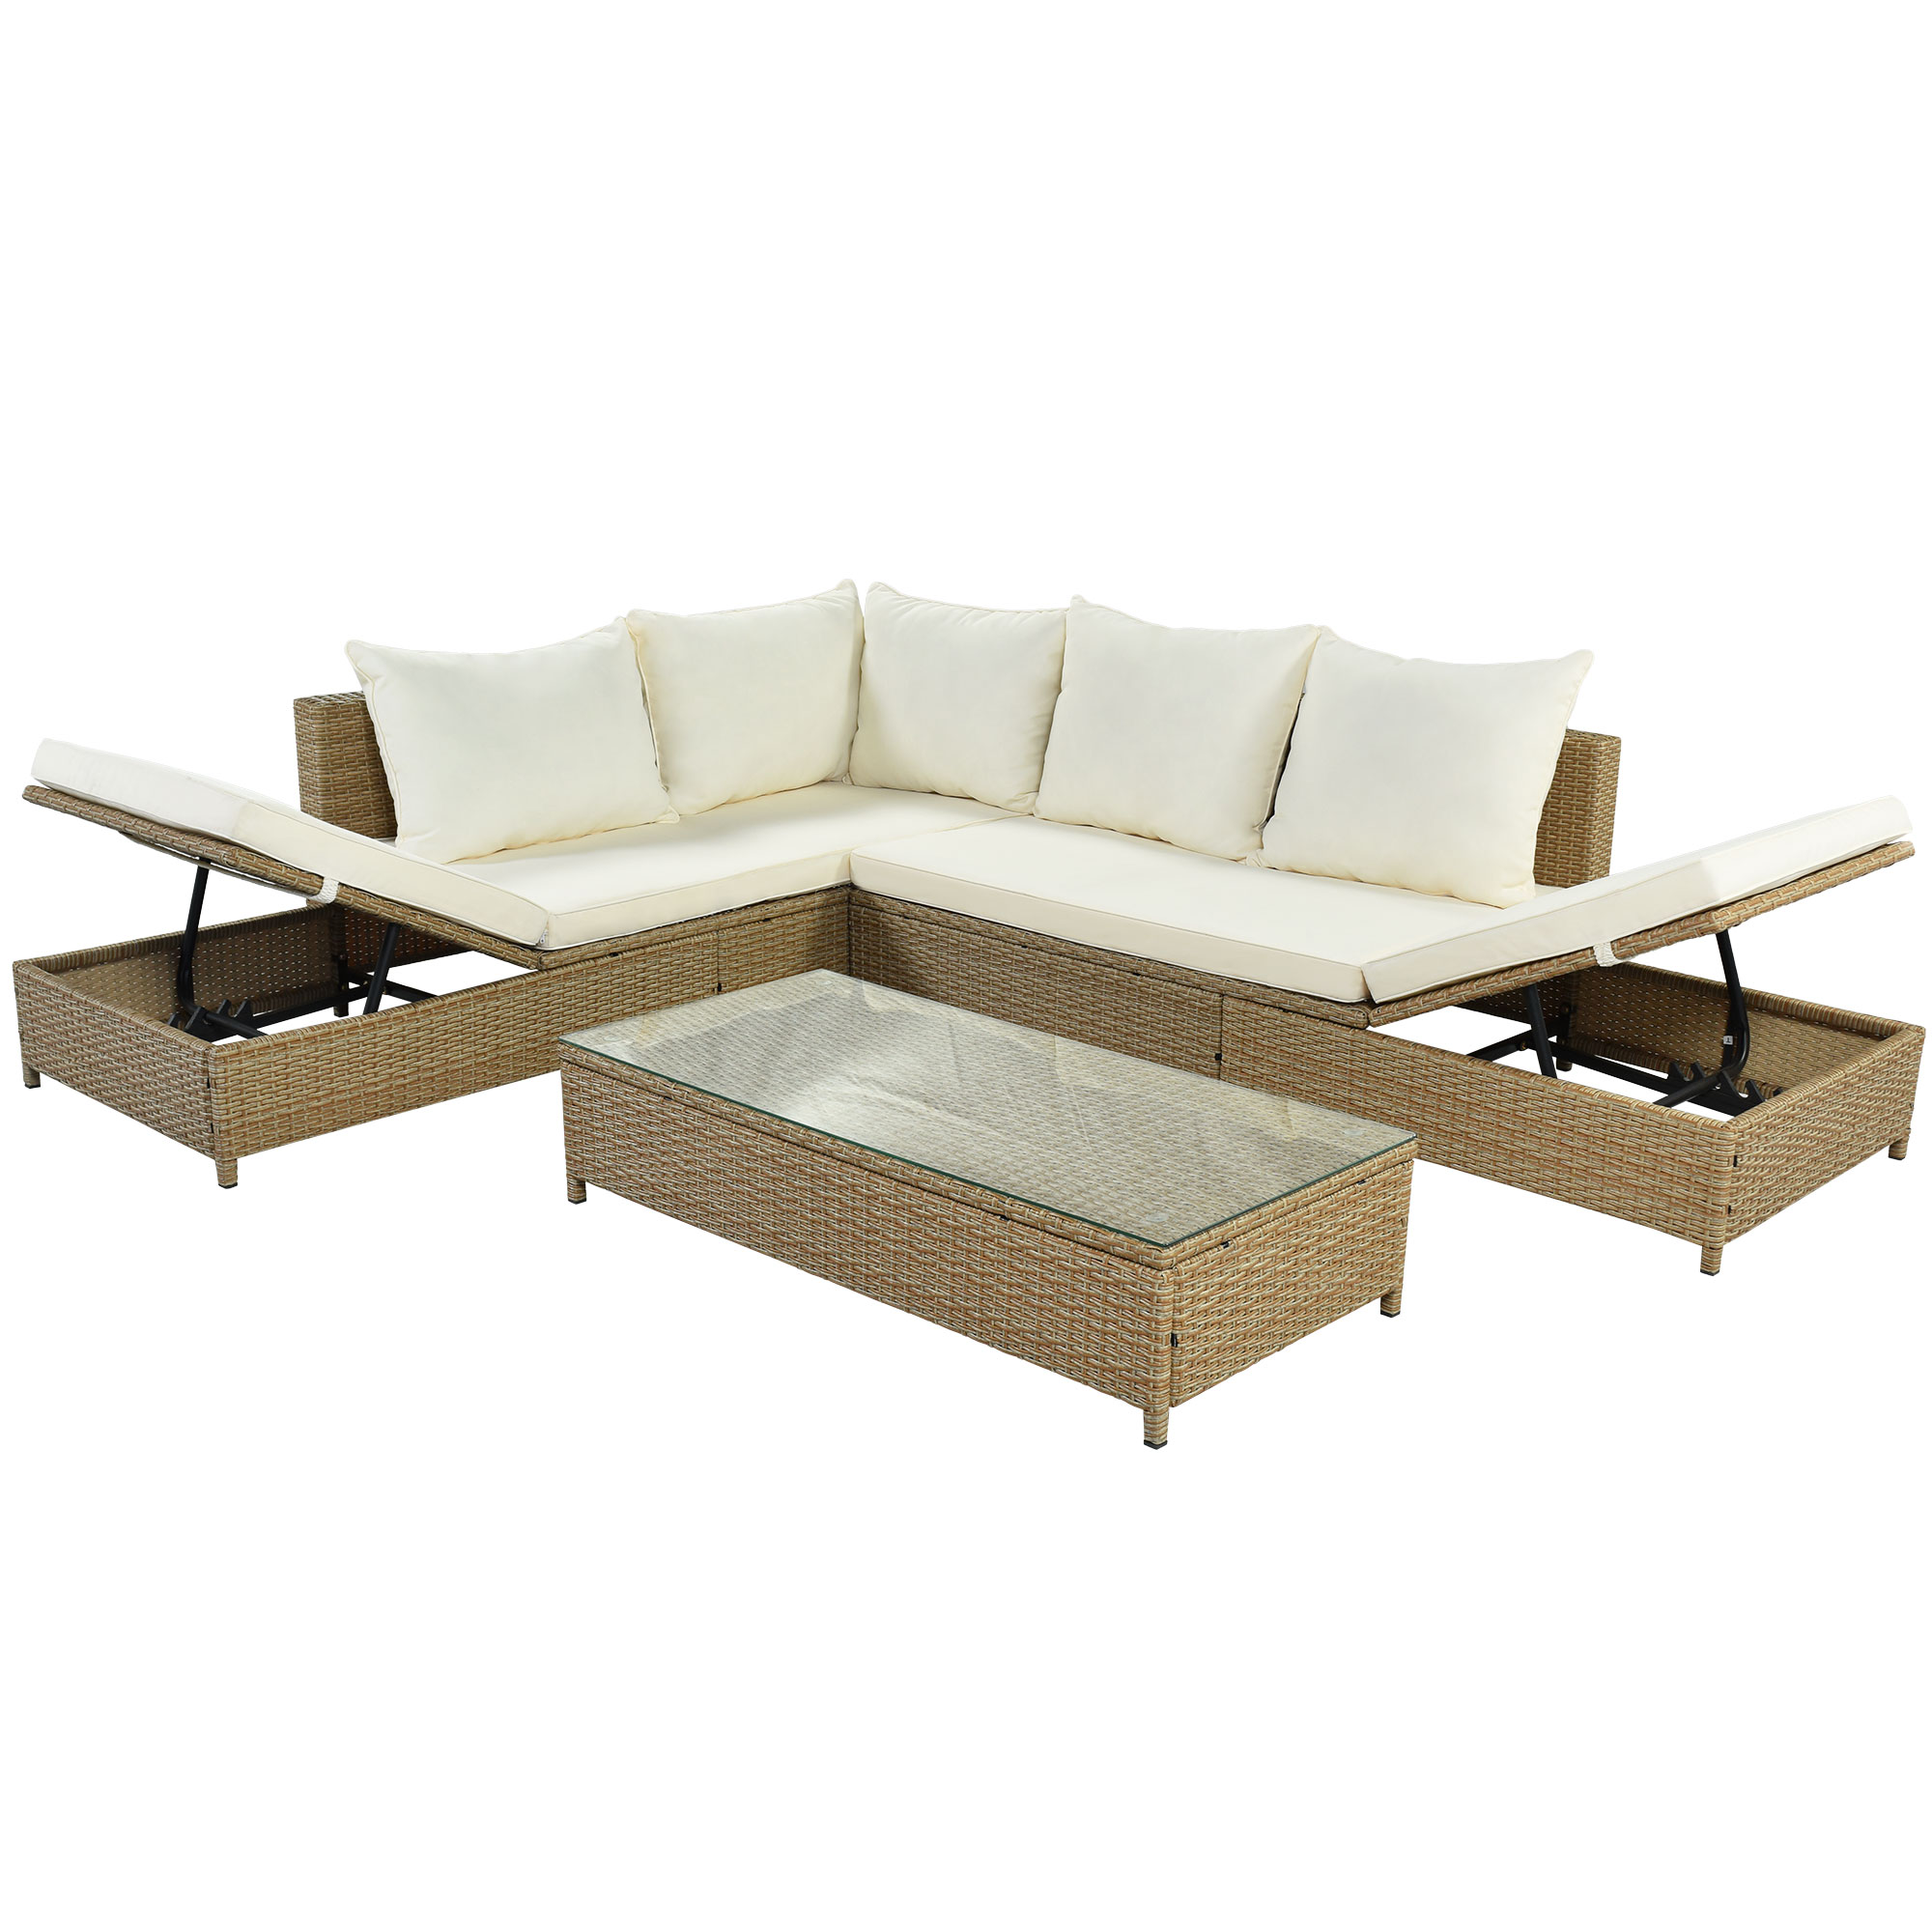 TOPMAX Patio 3-Piece Rattan Sofa Set All Weather PE Wicker Sectional Set with Adjustable Chaise Lounge Frame and Tempered Glass Table, Natural Brown+ Beige Cushion - image 4 of 9